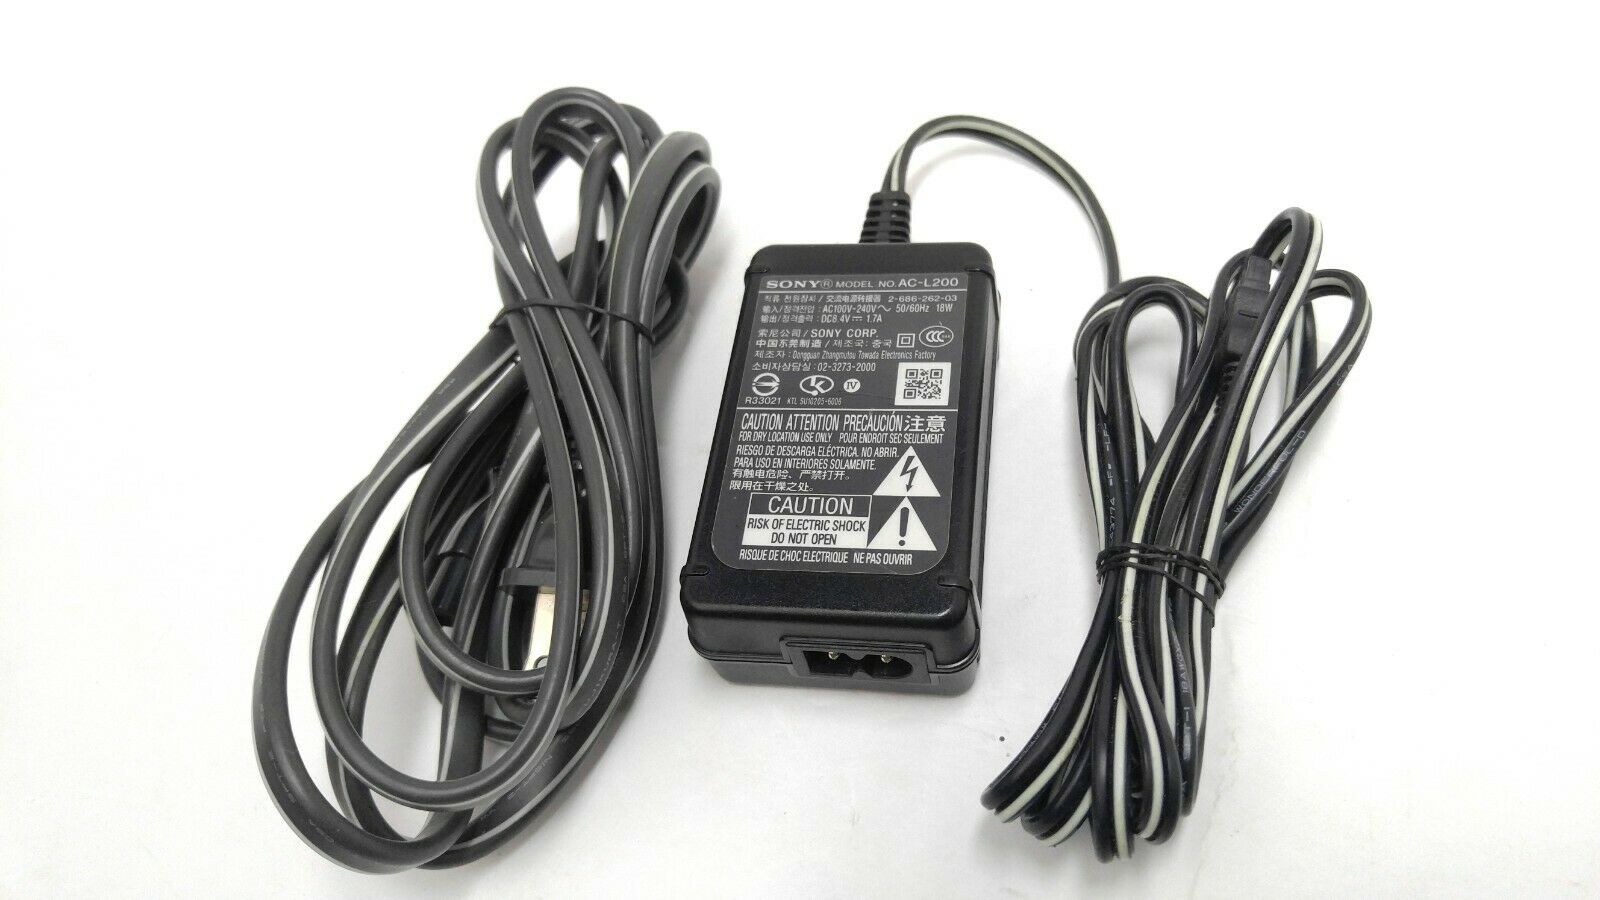 AC-L200 Sony AC Adapter for Handycam HDR-CX500